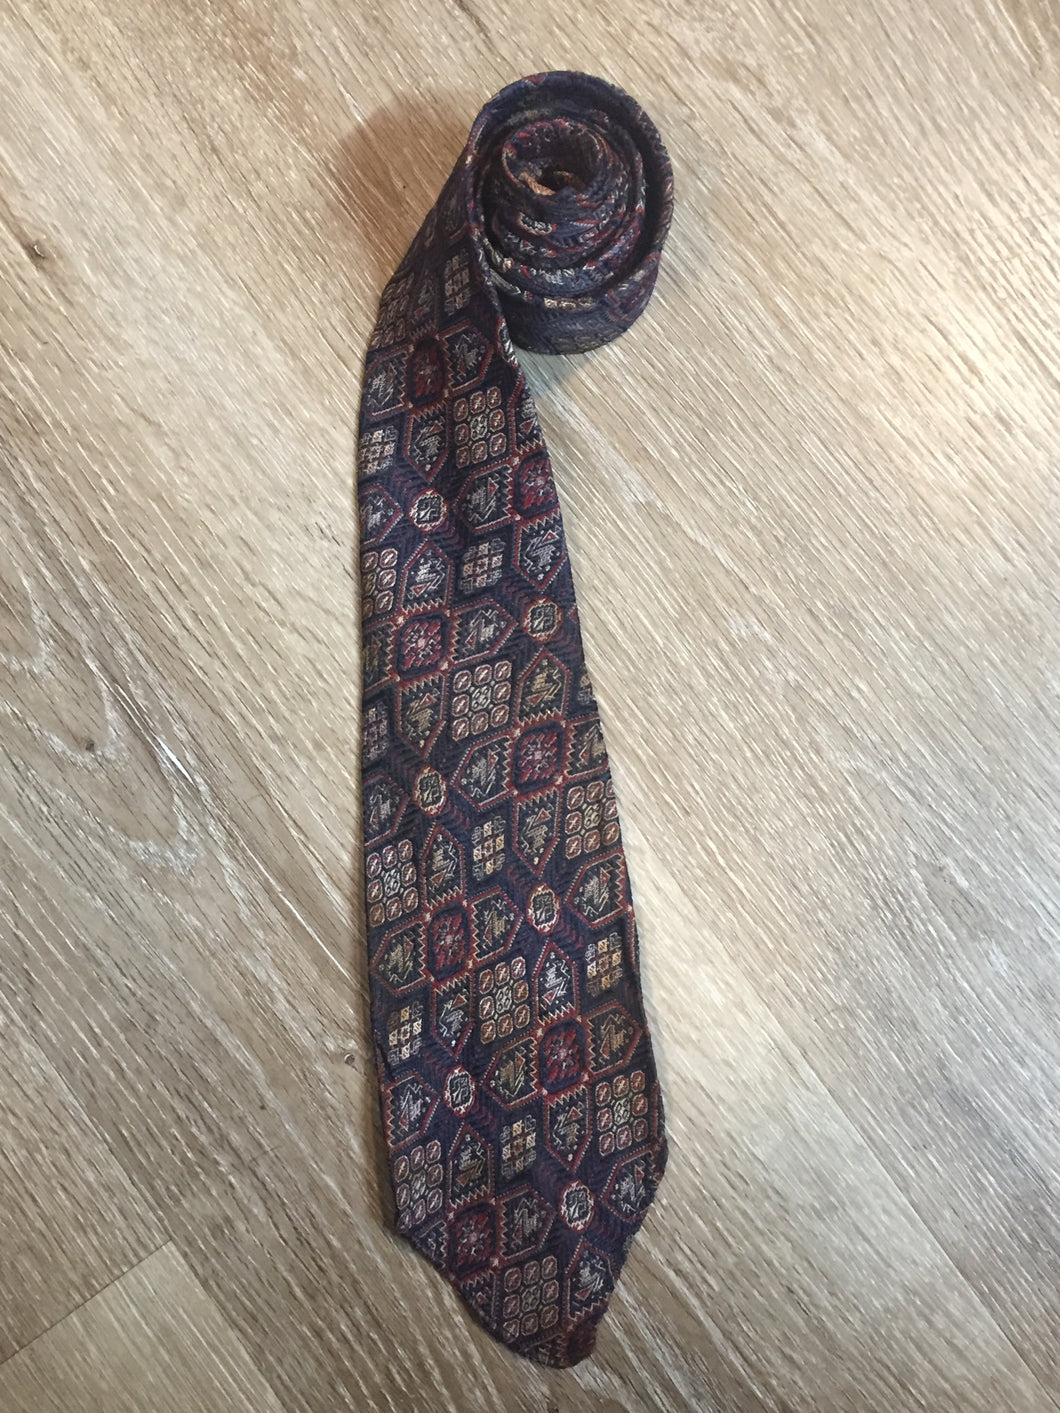 Kingspier Vintage - Currie “Authentic Ancient Persians” with navy, red and cream design. Fibres unknown but feels like sIlk.

Length: 51.5” 
Width: 3” 

This tie is in great condition with some minor wear.